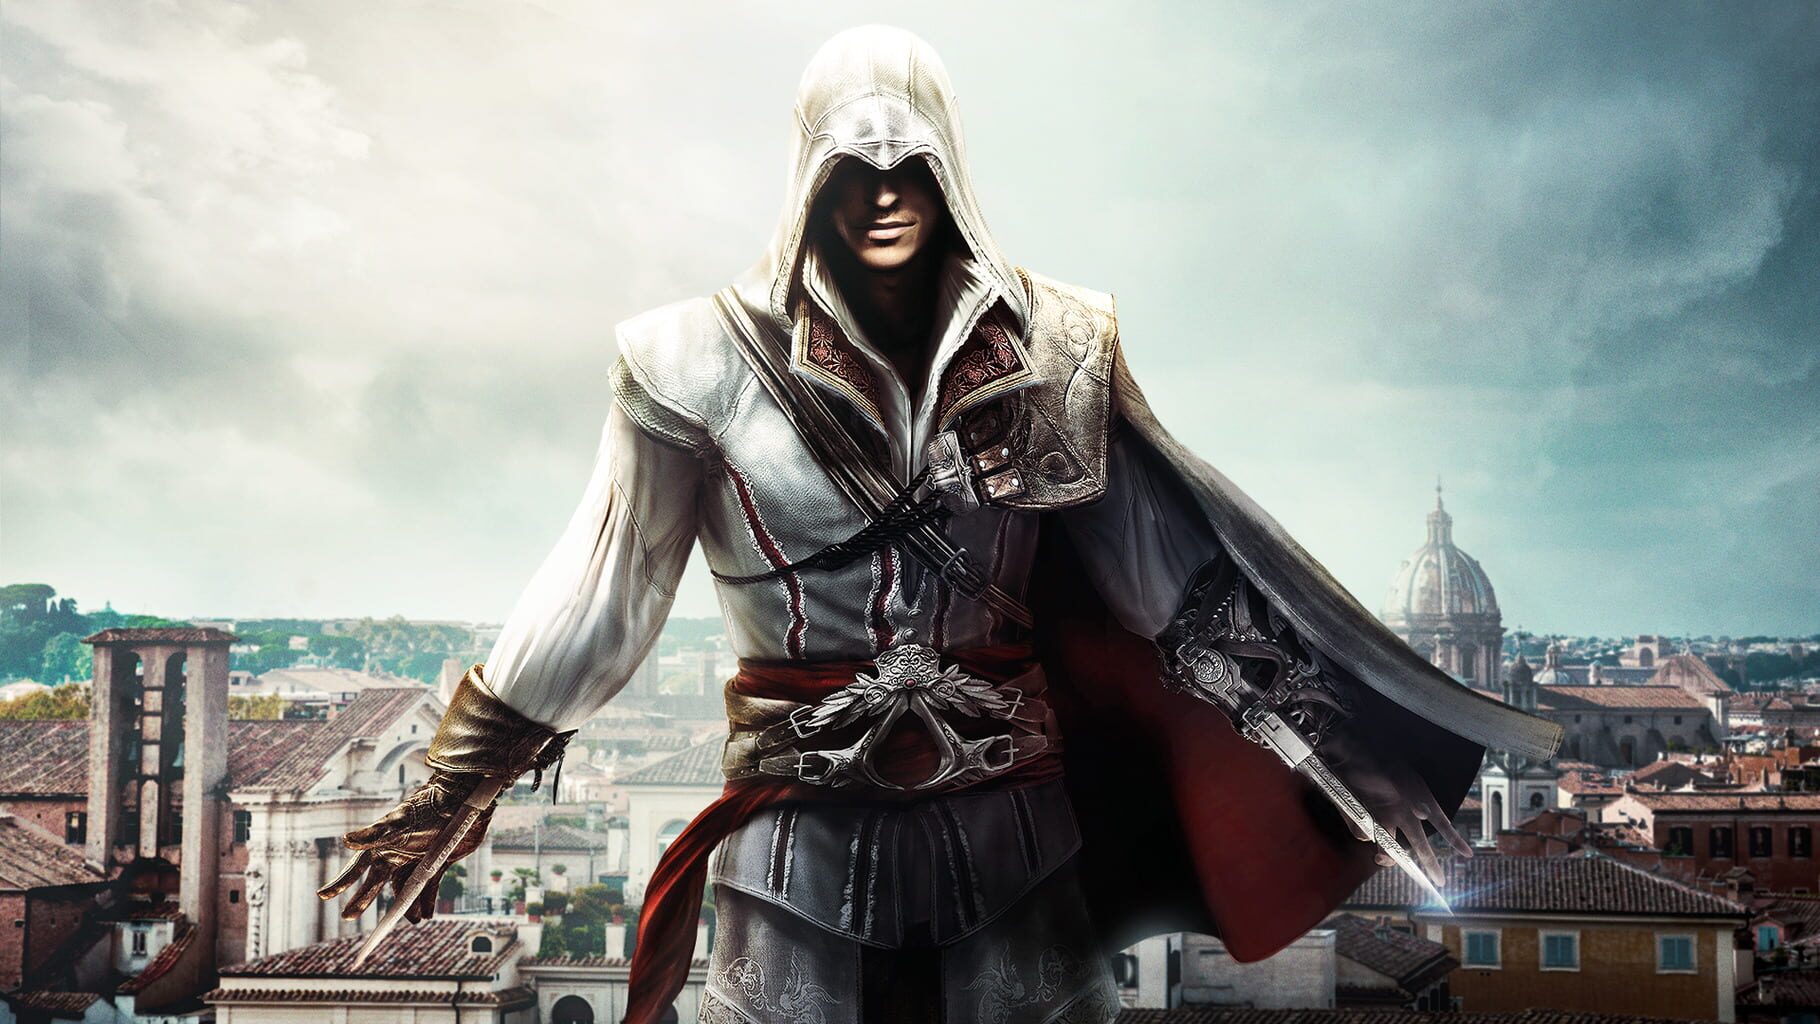 Artwork for Assassin's Creed: The Ezio Collection